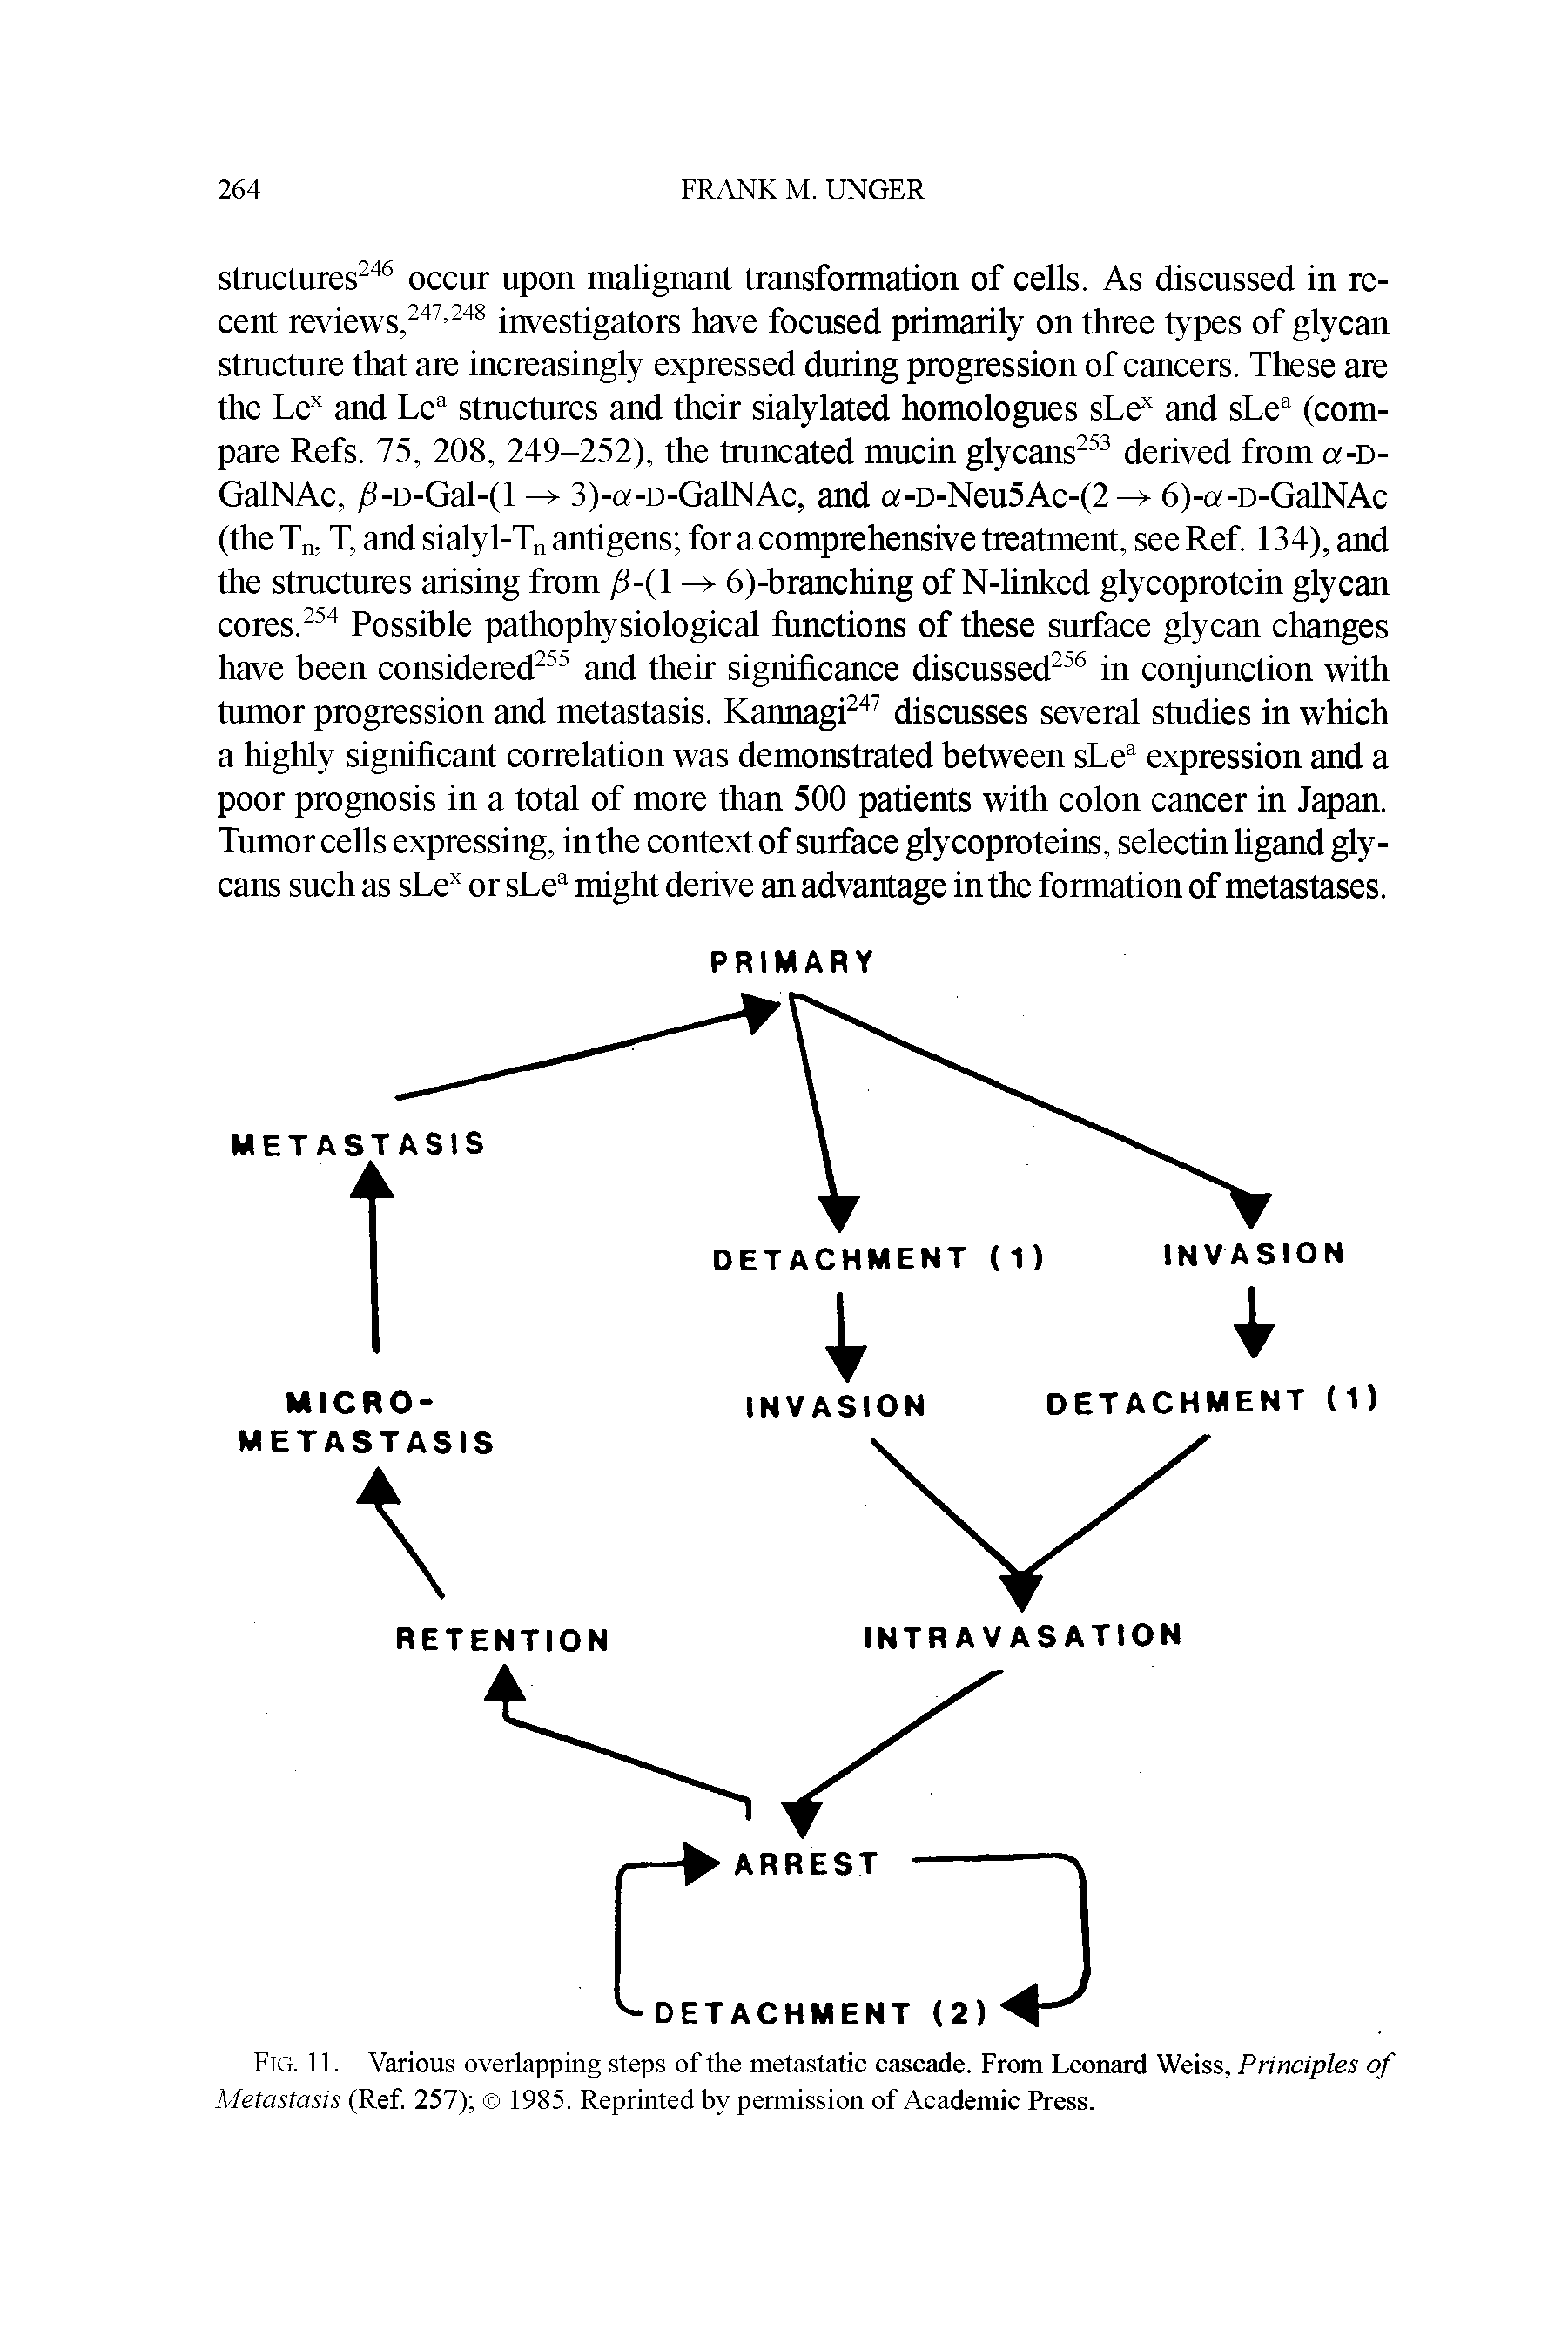 Fig. 11. Various overlapping steps of the metastatic cascade. From Leonard Weiss, Principles of Metastasis (Ref. 257) 1985. Reprinted by permission of Academic Press.